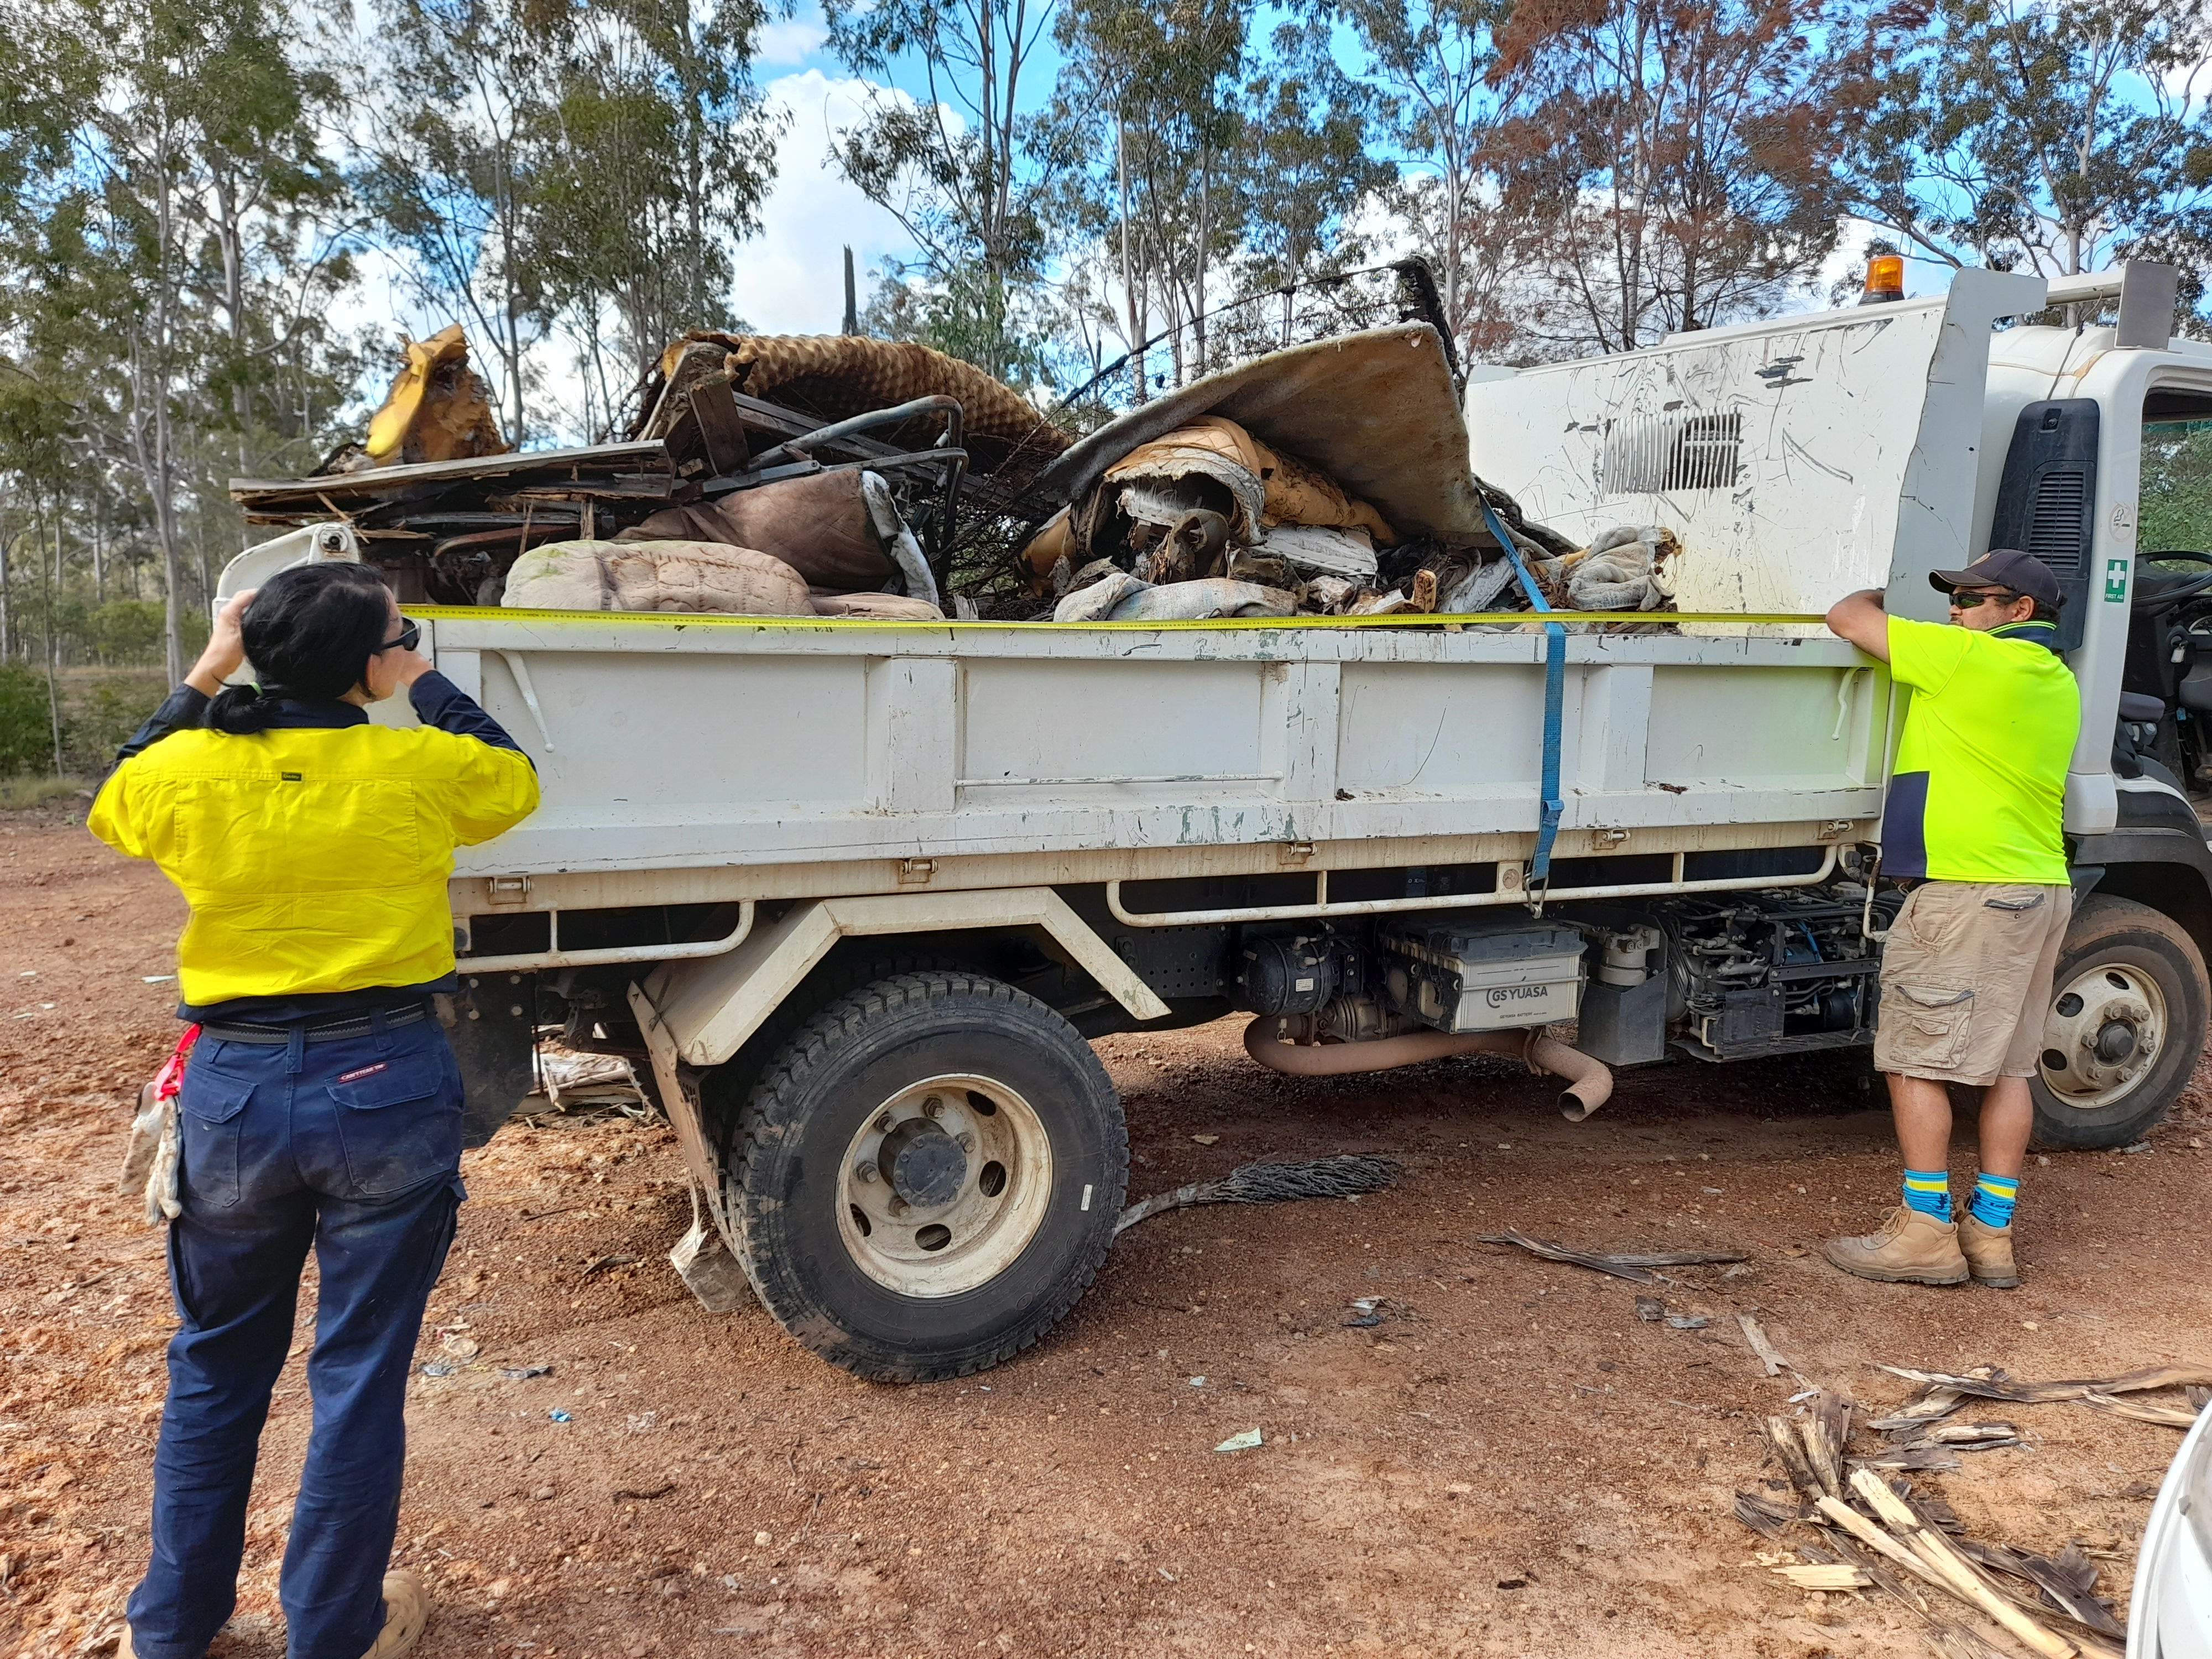 Images (2): Cherbourg Aboriginal Shire Council and South Burnett Regional Council working together to clear an illegal dumping site towards a sustainable future for our region